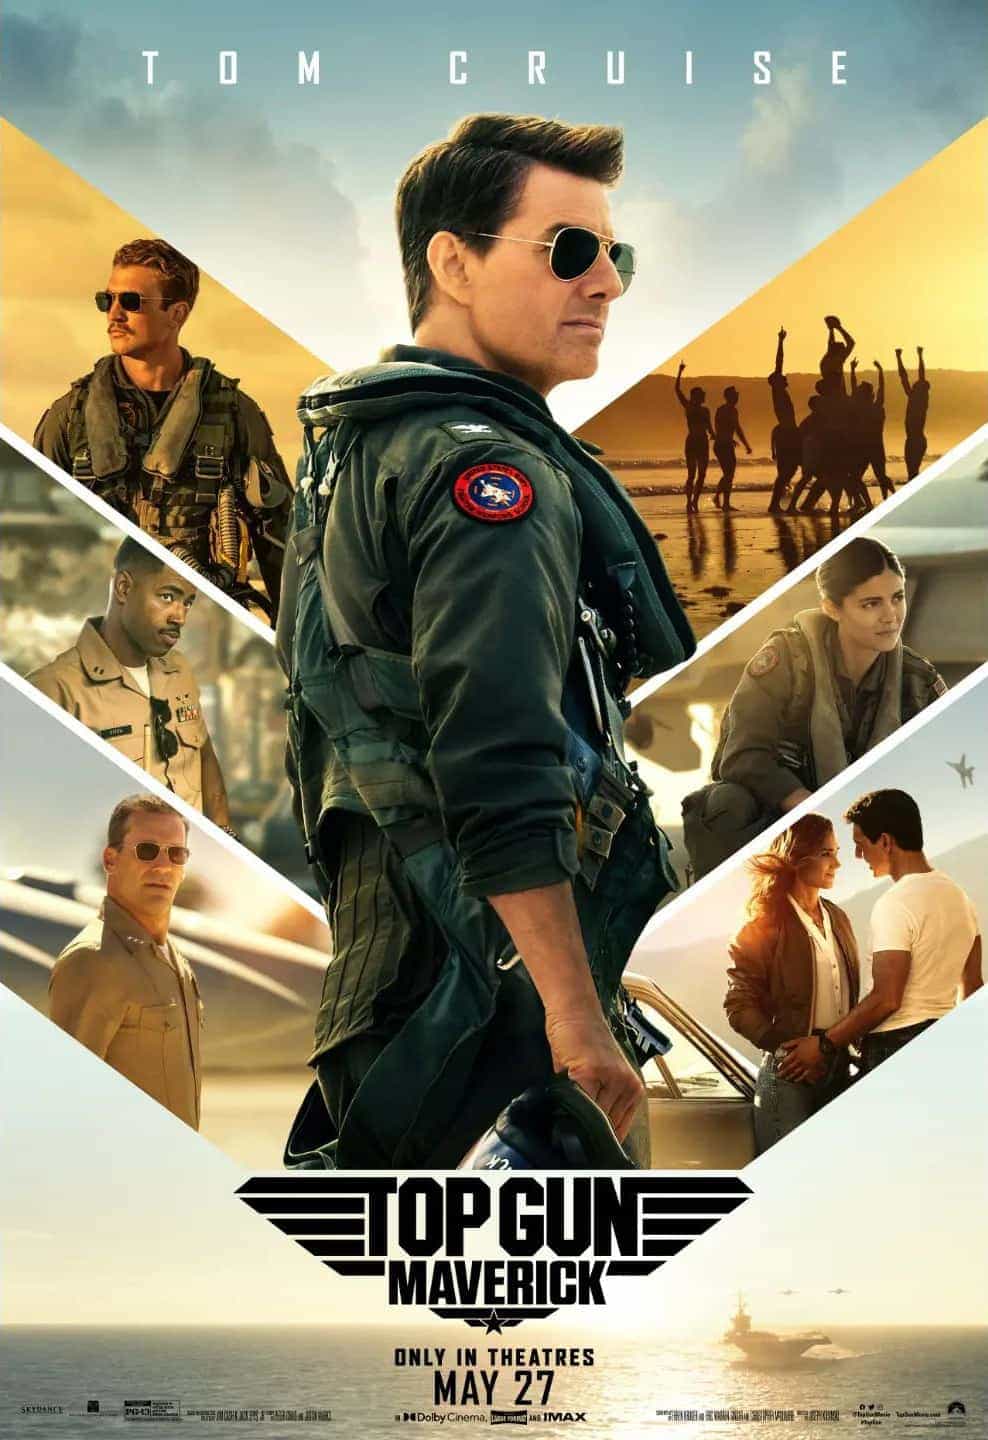 World Box Office Weekend Report 27th - 29th May 2022: Tom Cruise hits the top of the box office with his long awaited Top Gun sequel